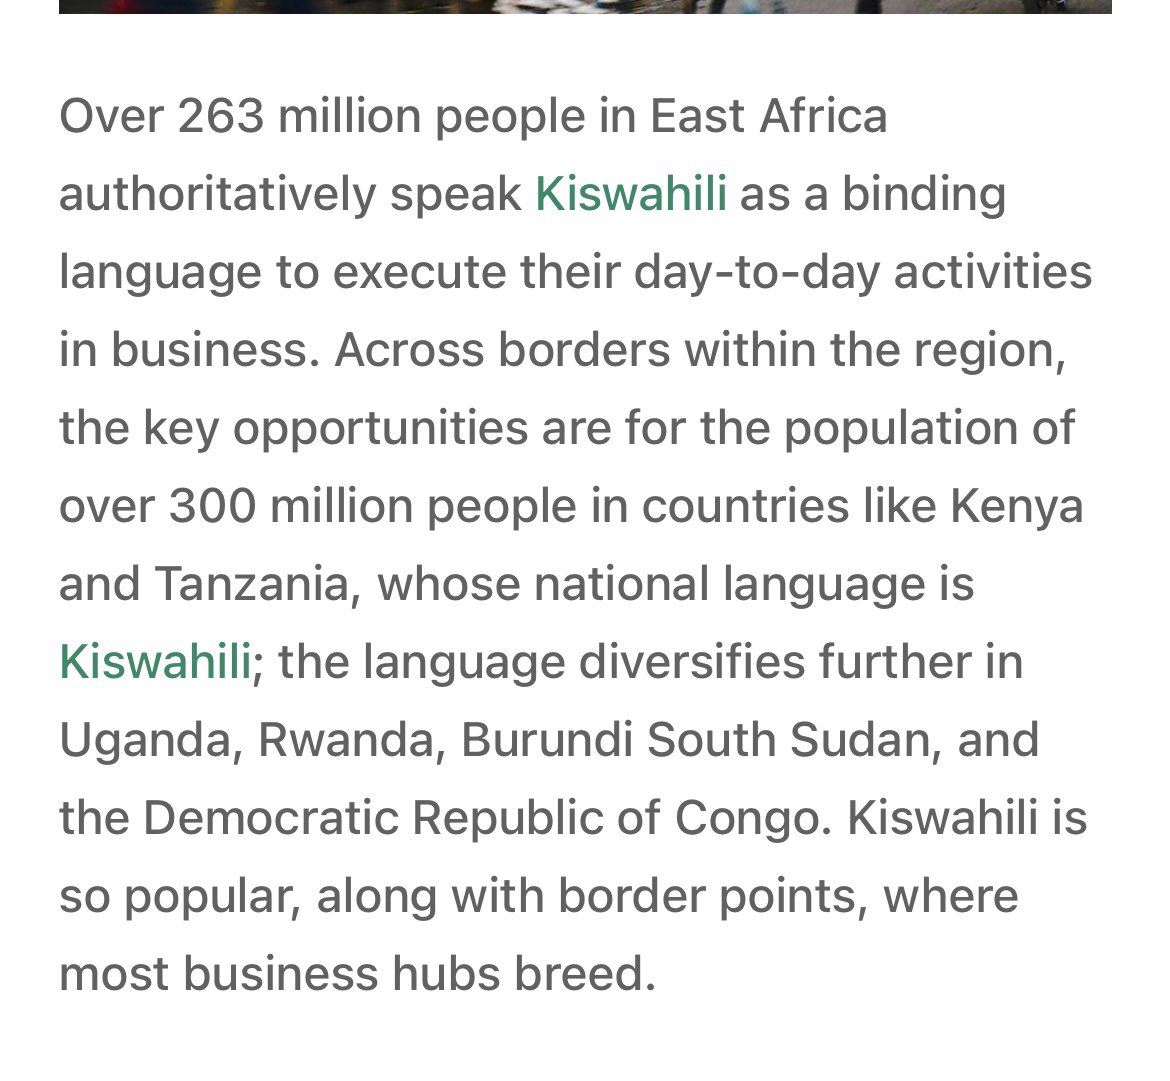 Kiswahili is #1 and Amharic is the #2 widely spoken language in East Africa The more you know 👇🏽👇🏽👇🏽